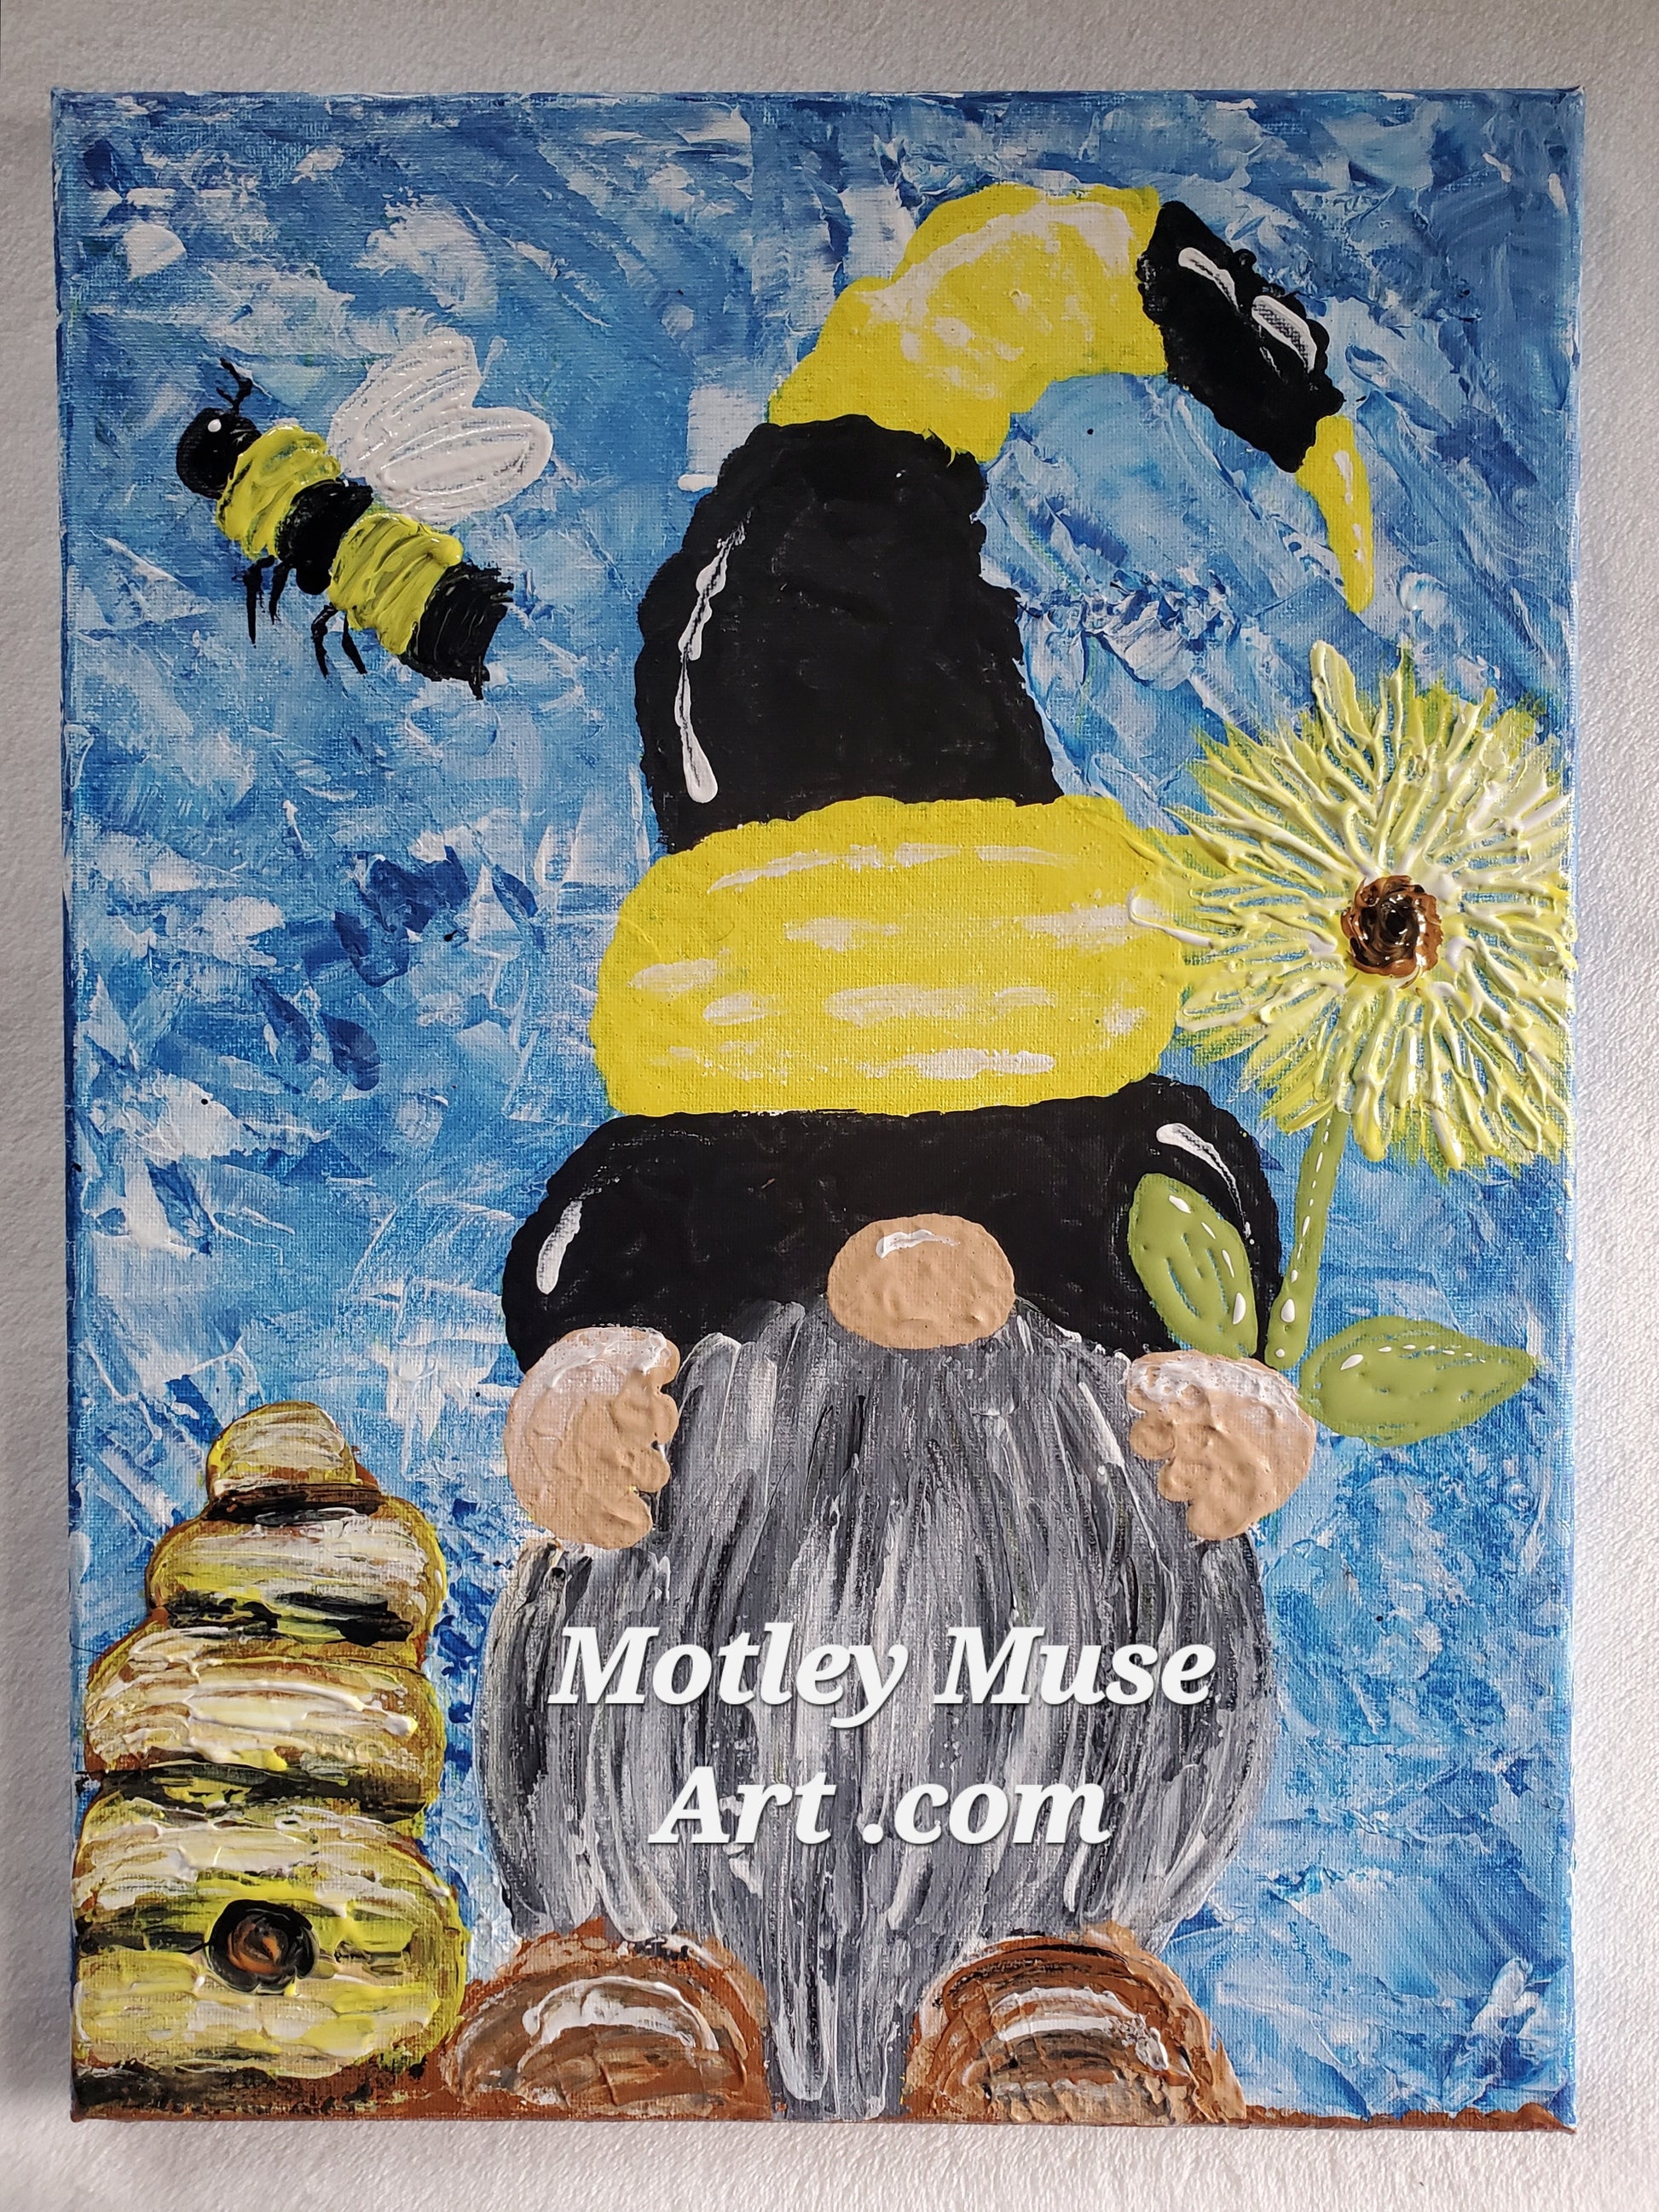 Our artist, Yvette owner of Motley Muse, will instruct you step by step, making it easy for you to complete this painting. At the end of the party, you'll take home a one-of-a-kind painting that you love and a new found talent!

Before or after the class have fun bowling. This party is a great idea for having quality time with your loved ones. And if they don't want to paint this is a great idea for them to have something awesome to do while your having a great time hanging out and painting with us.

